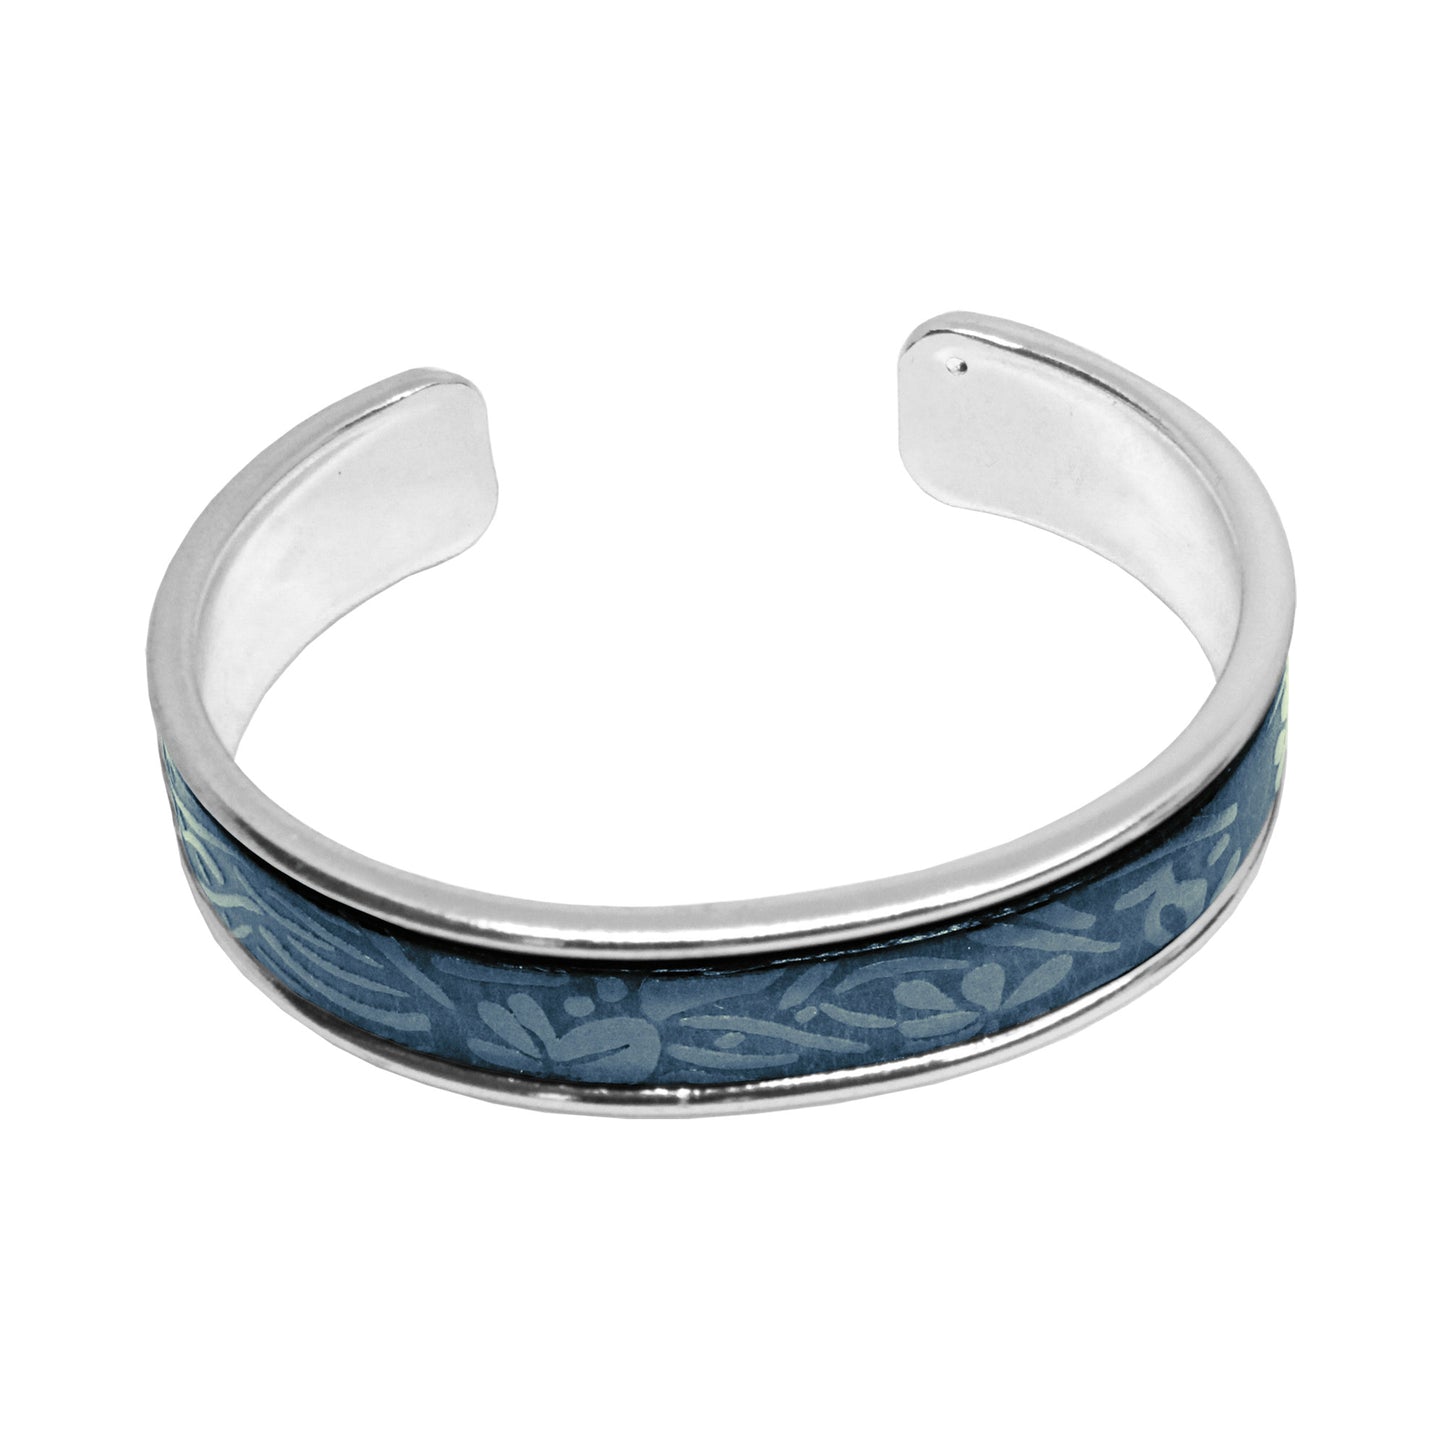 Blue Leather Cuff Bracelet / fits up to 7 inch wrist size / embossed floral leather / rhodium plated cuff